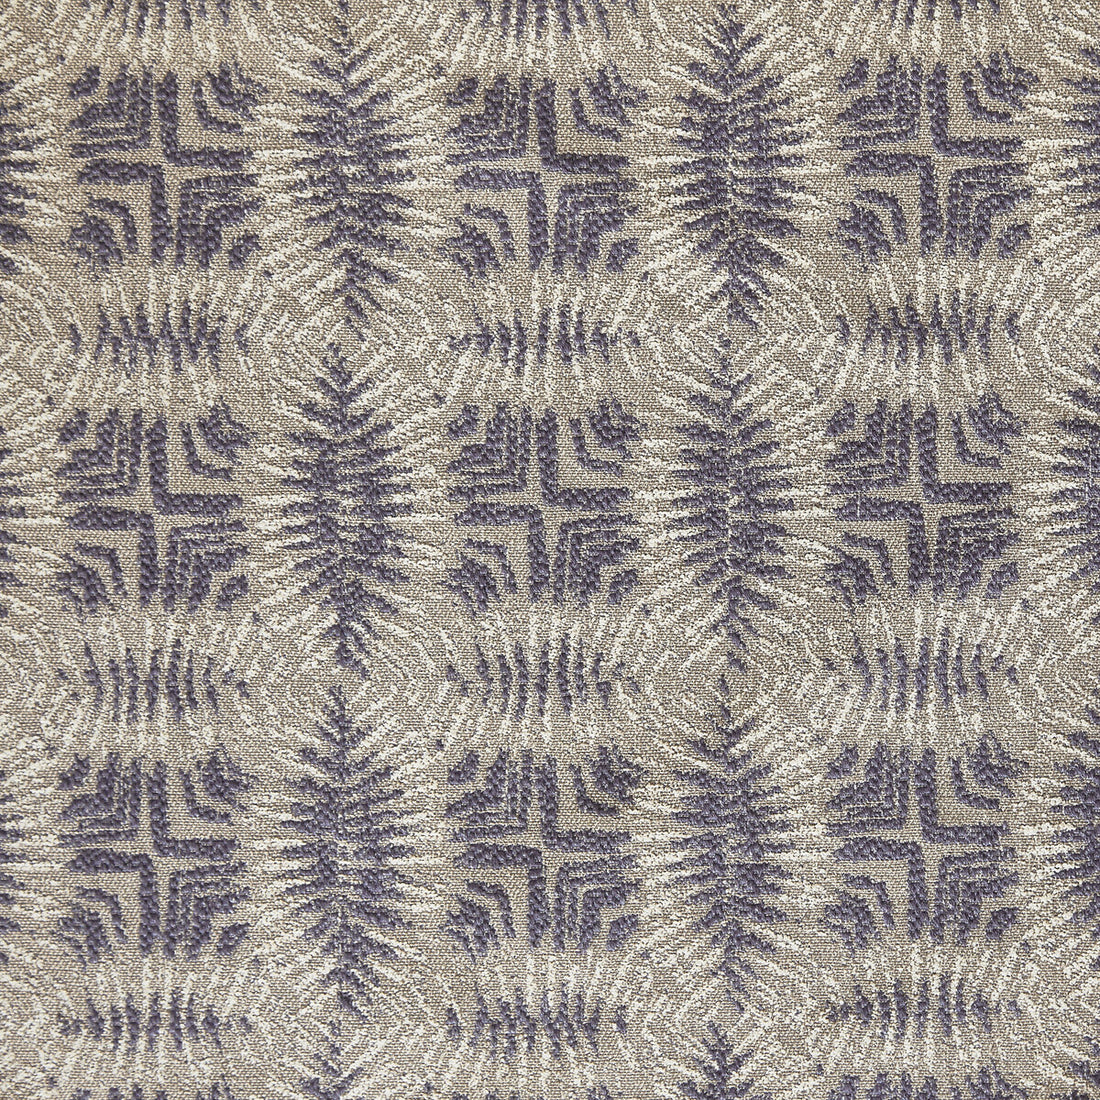 Calypso fabric in lavender color - pattern GWF-3204.510.0 - by Lee Jofa Modern in the Allegra Hicks Islands collection